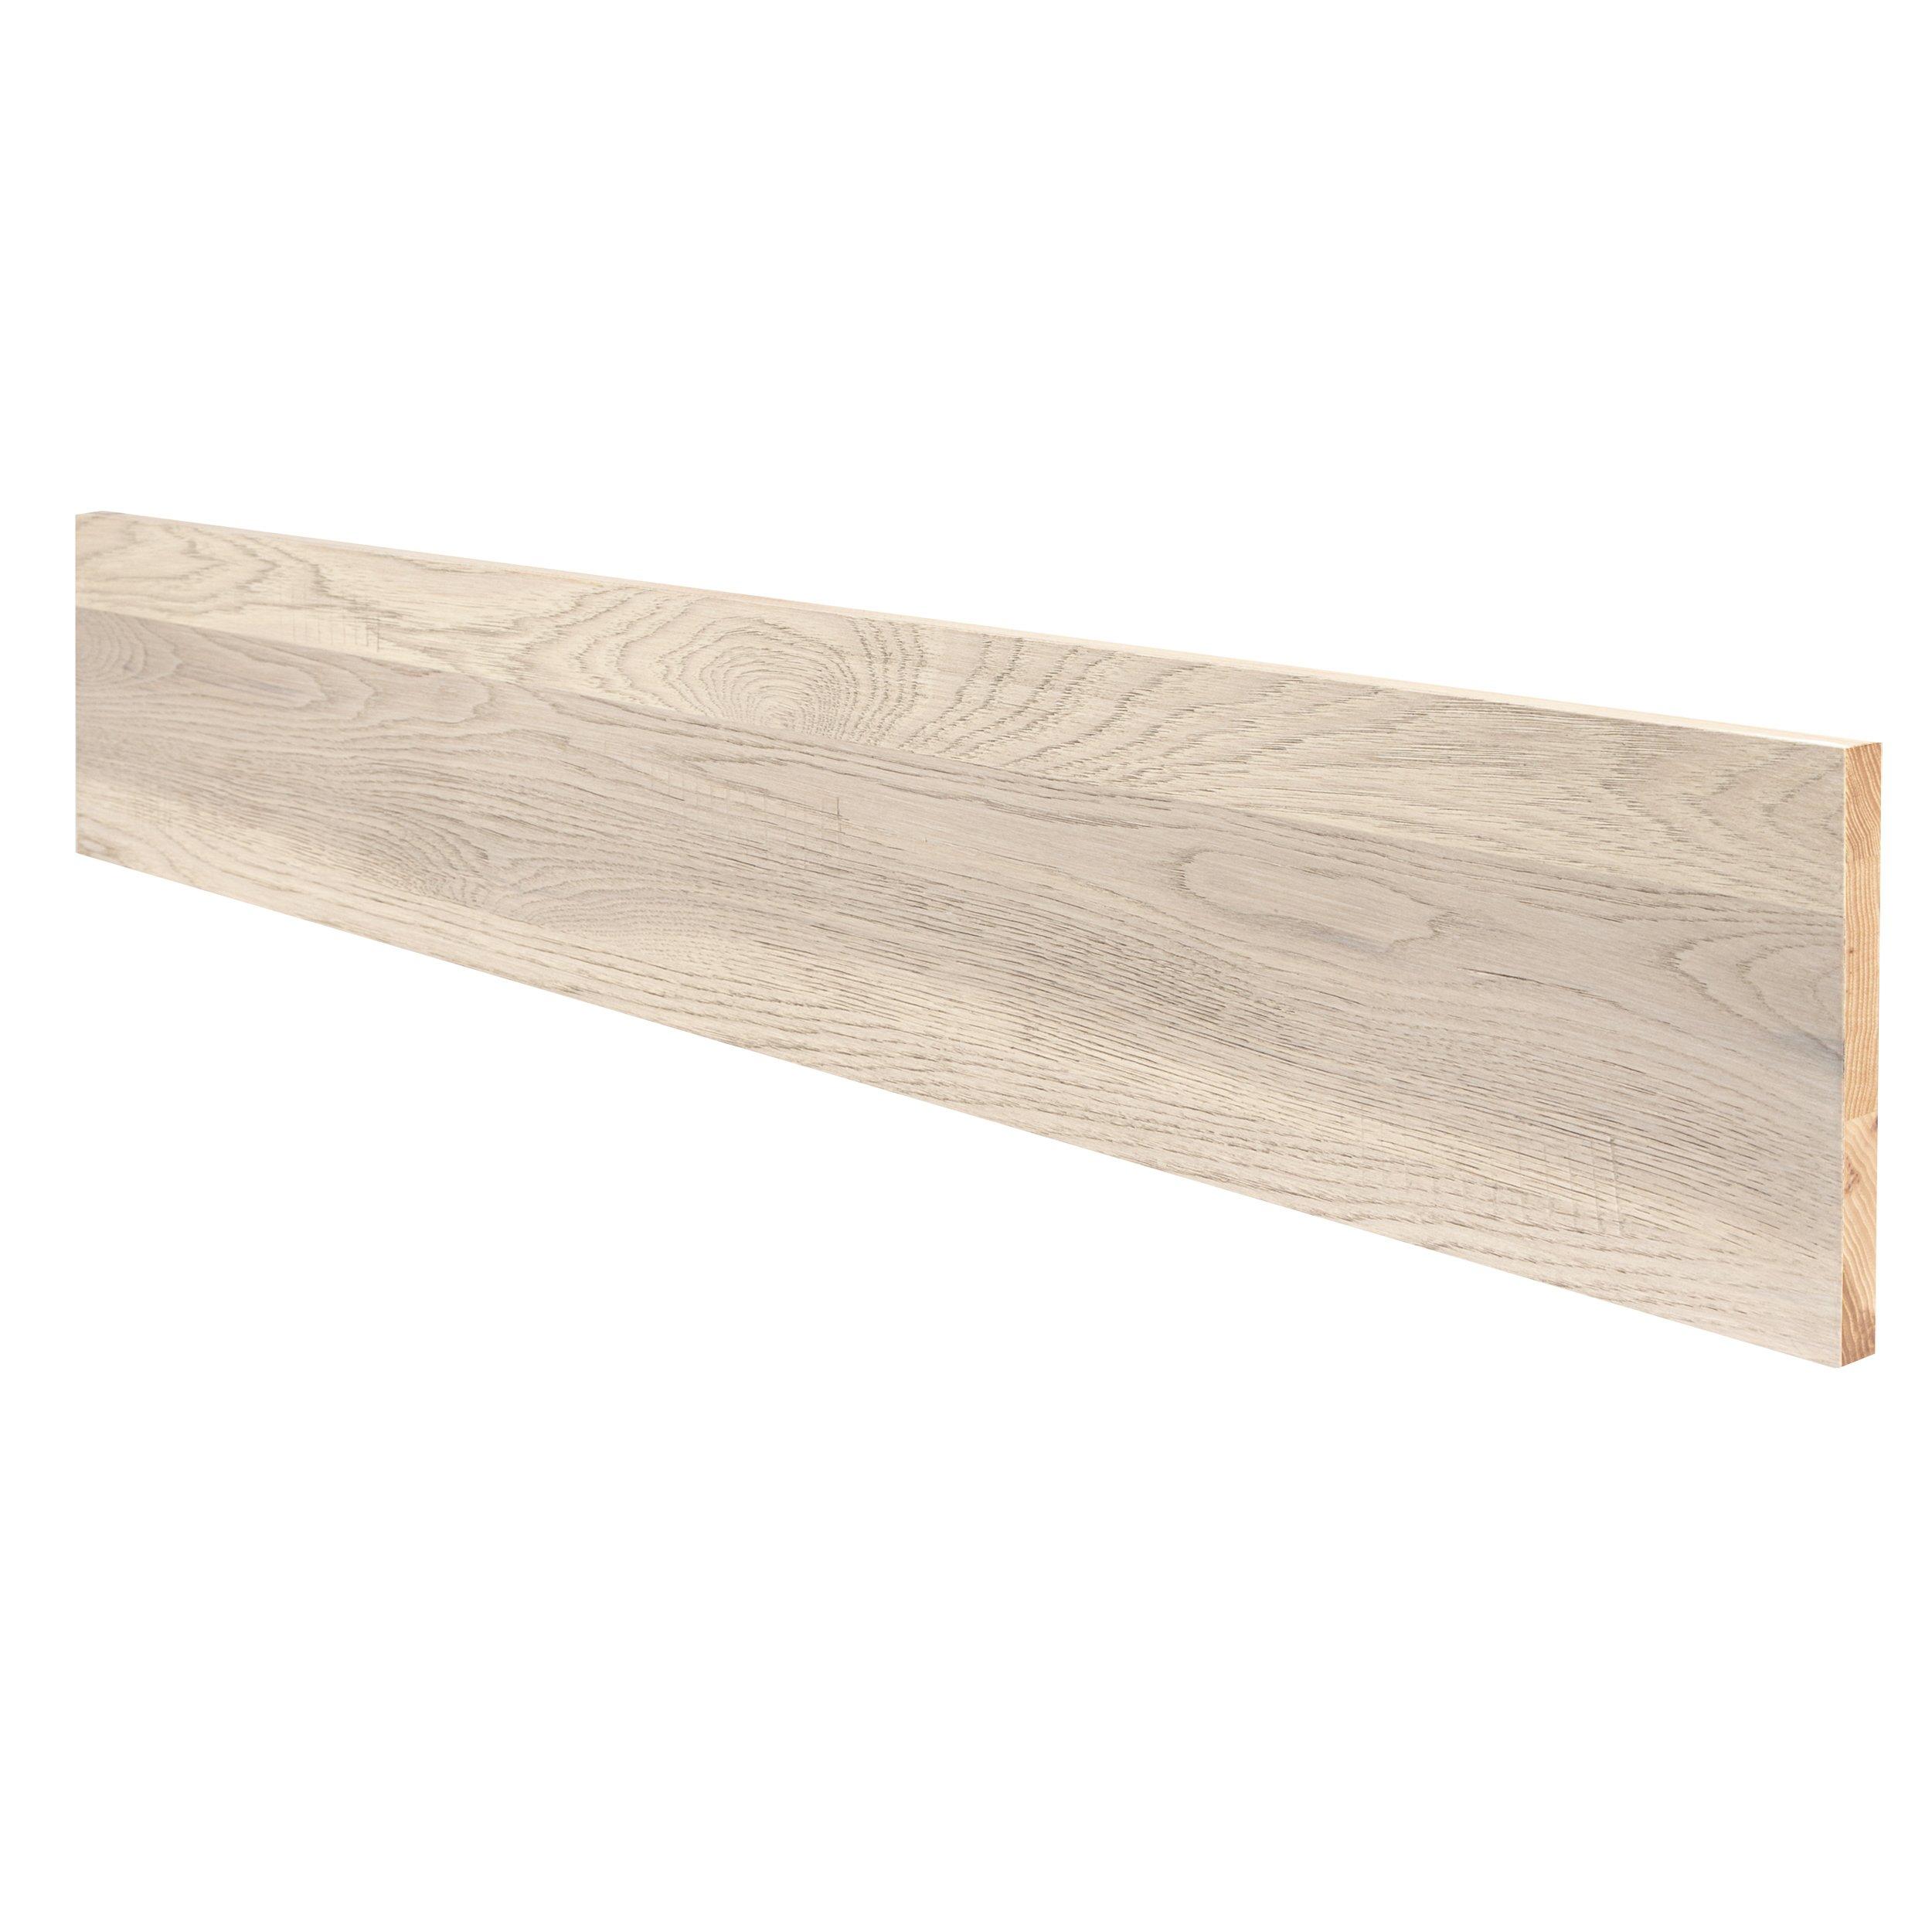 Daventry Hickory Stair Riser - 42in.